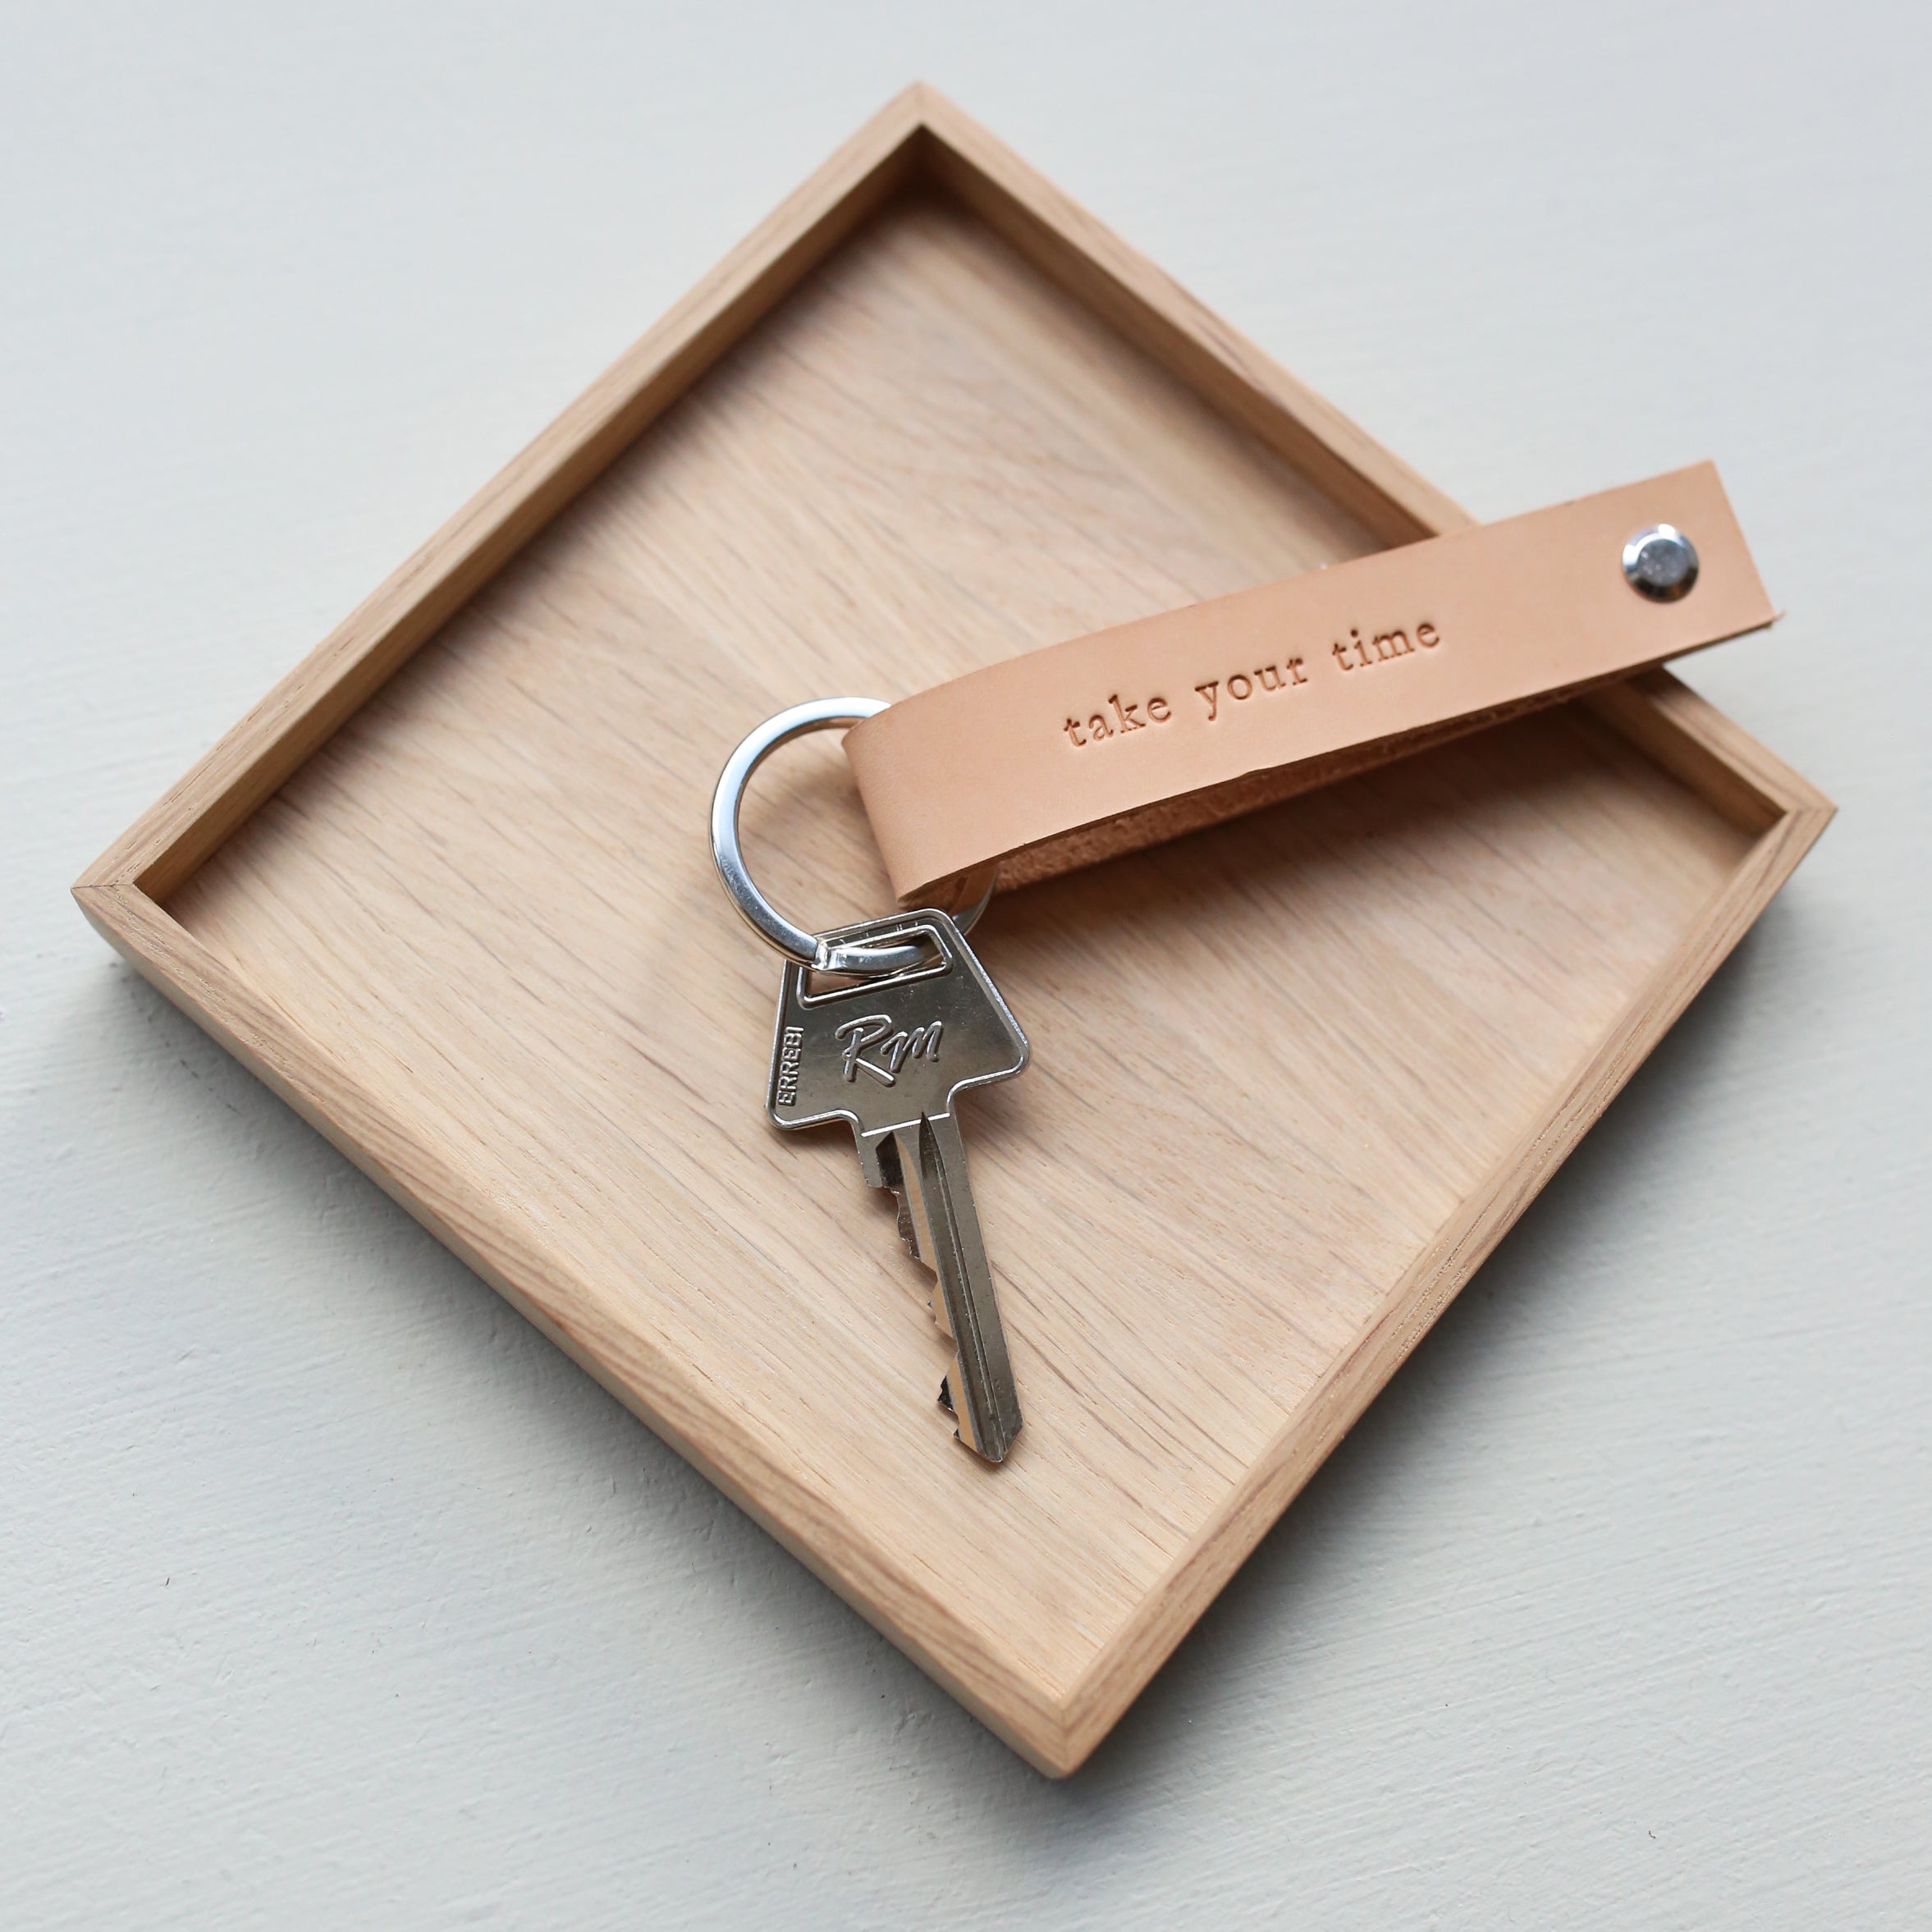 LEATHER KEY HOLDER // TAKE YOUR TIME II